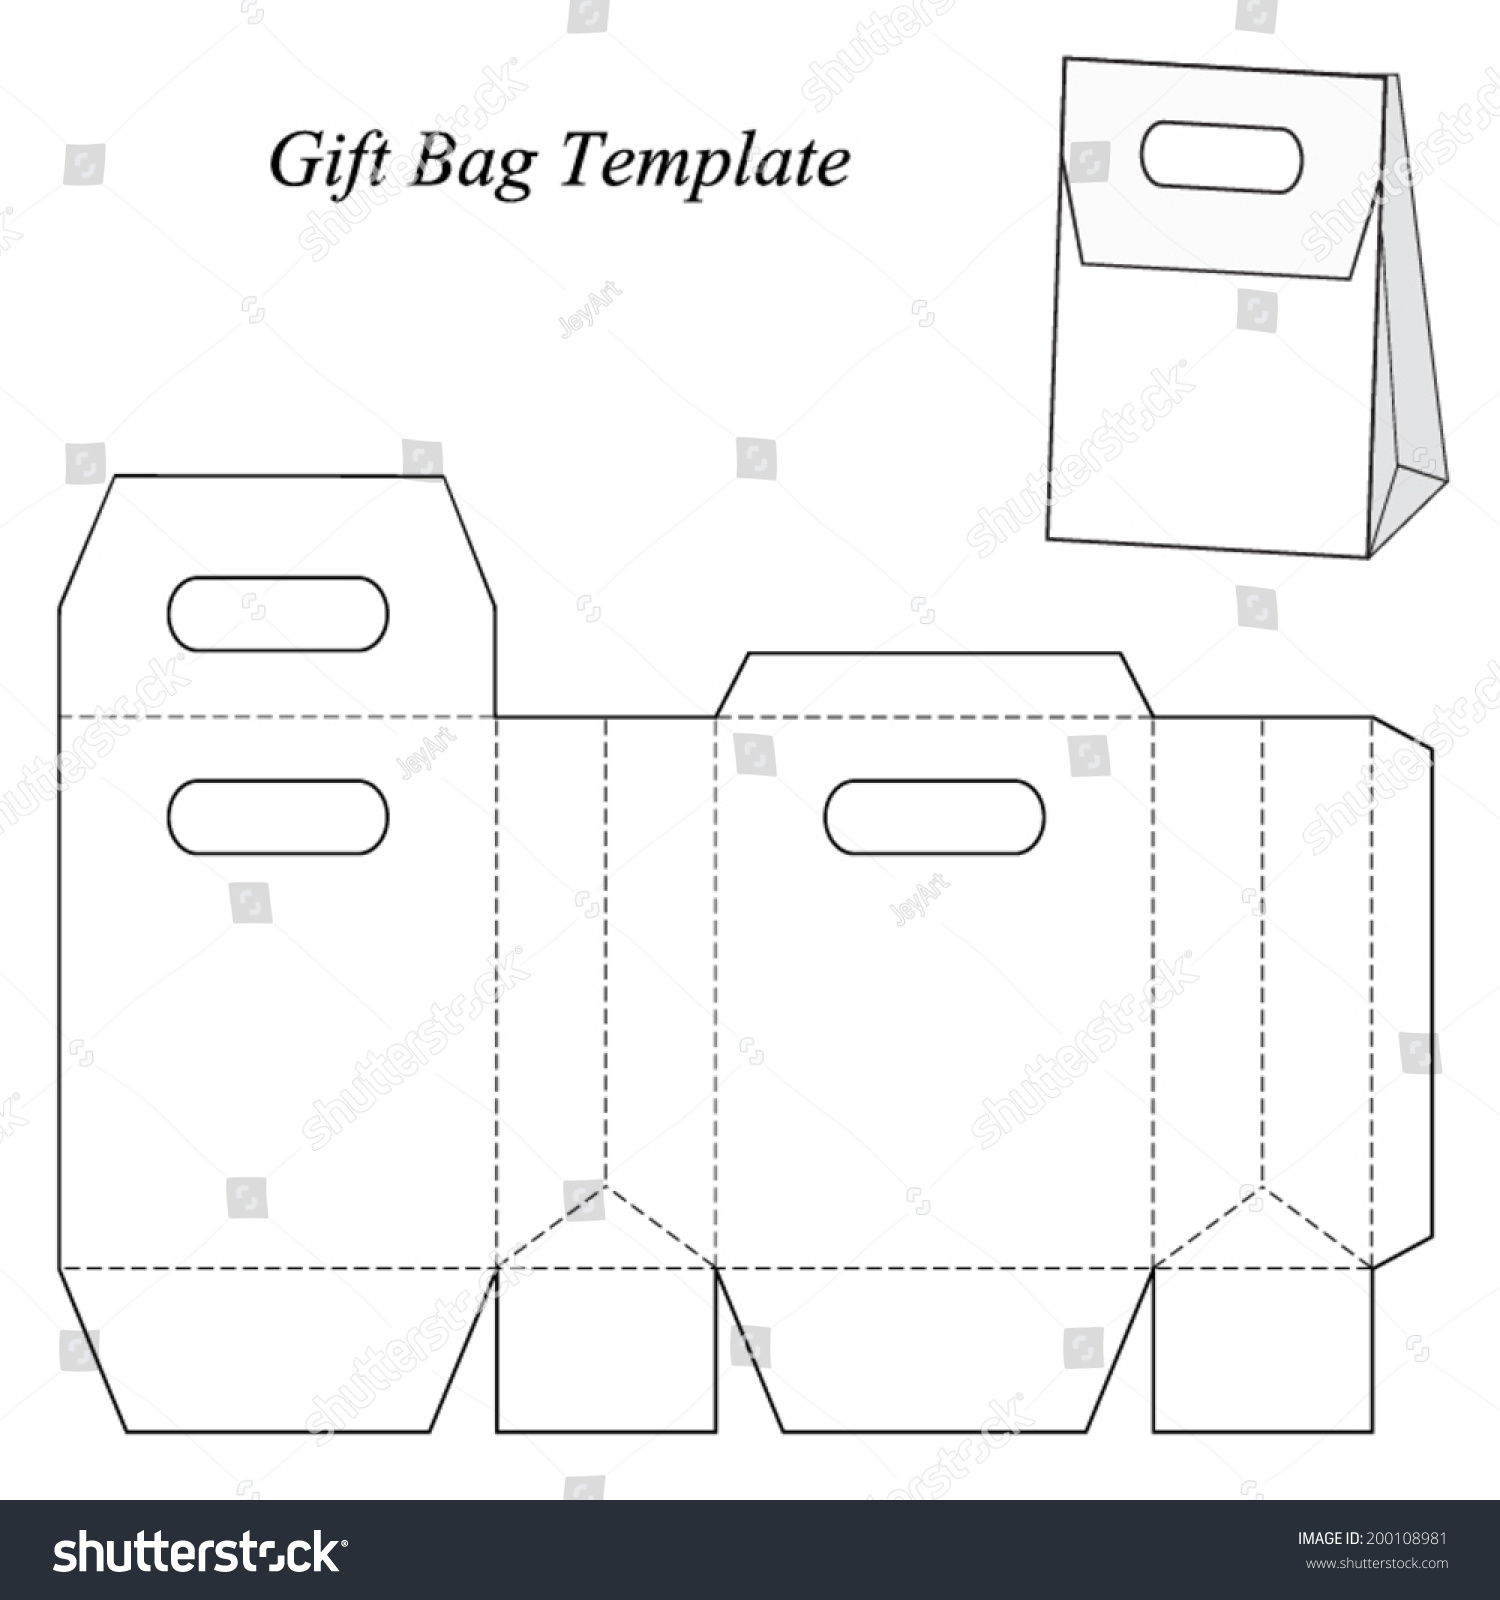 Gift Bag Template With Lid, Vector Illustration - 200108981 : Shutterstock